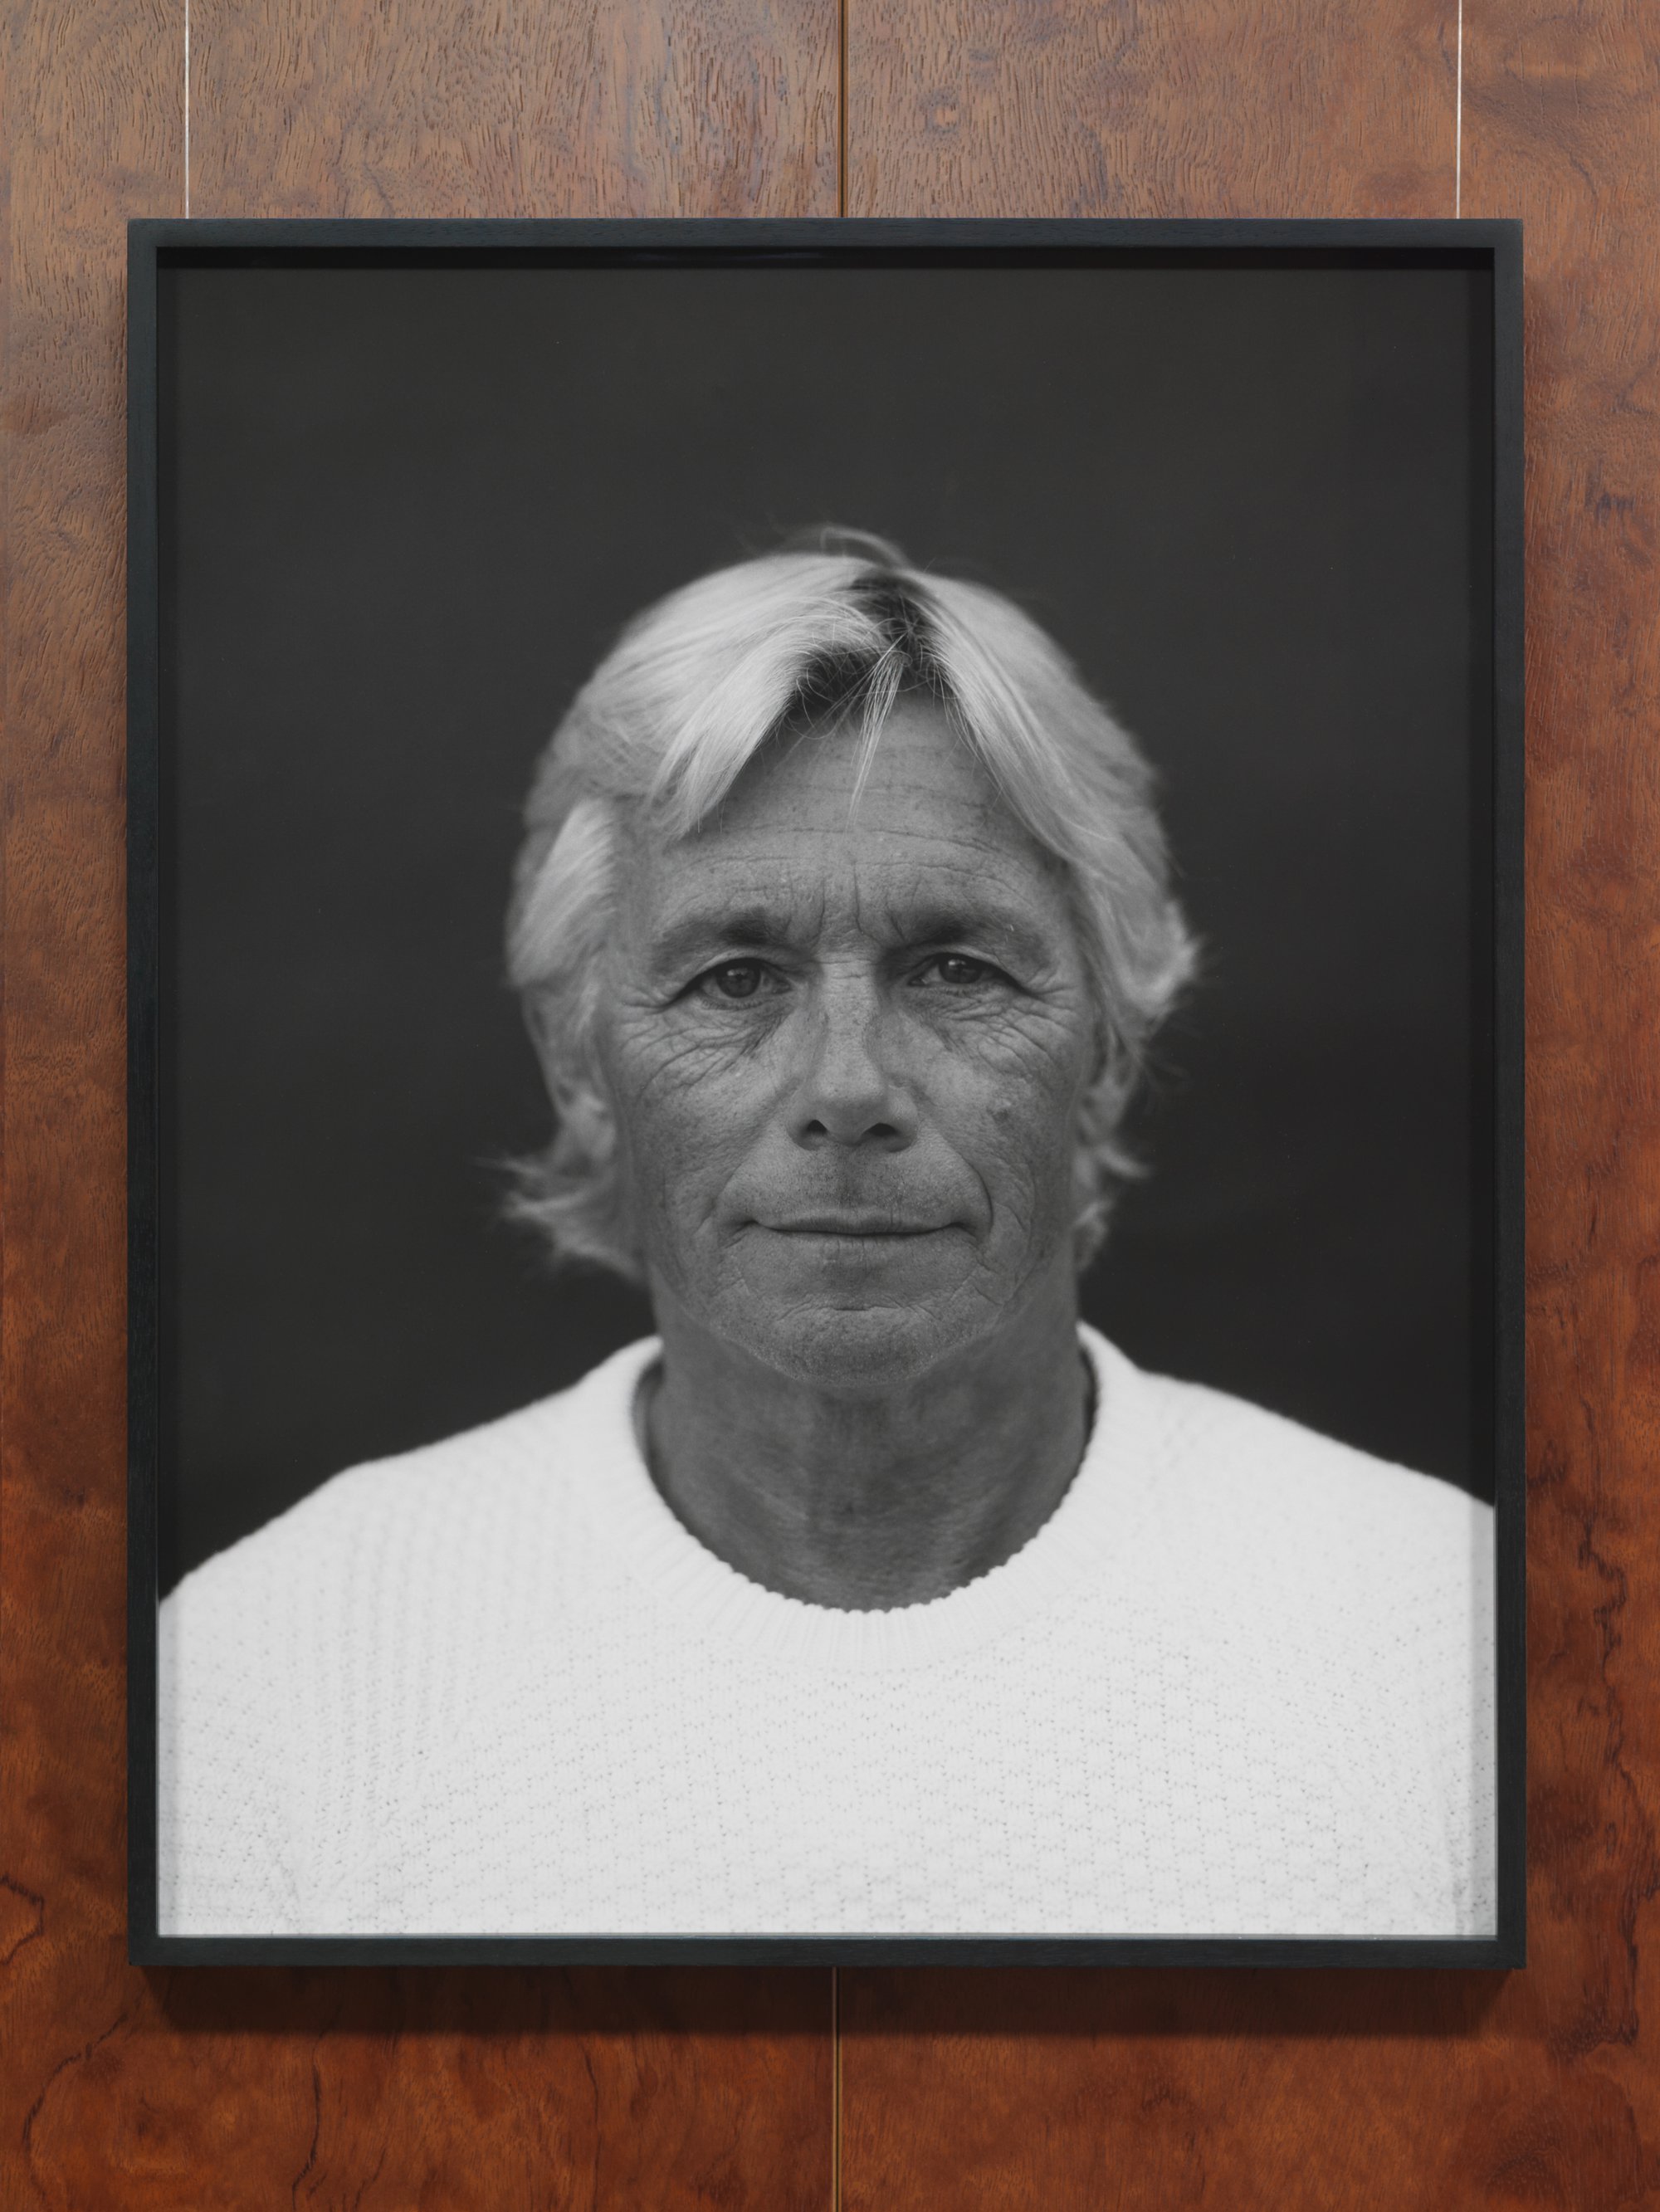 Christodoulos Panayiotou, The Portrait of Christopher Atkins, inkjet print on 300 gsm Pura Smooth, wooden frame, UV glass, 47.5 x 59.5 cm (18 3/4 x 23 3/8 in), 2021